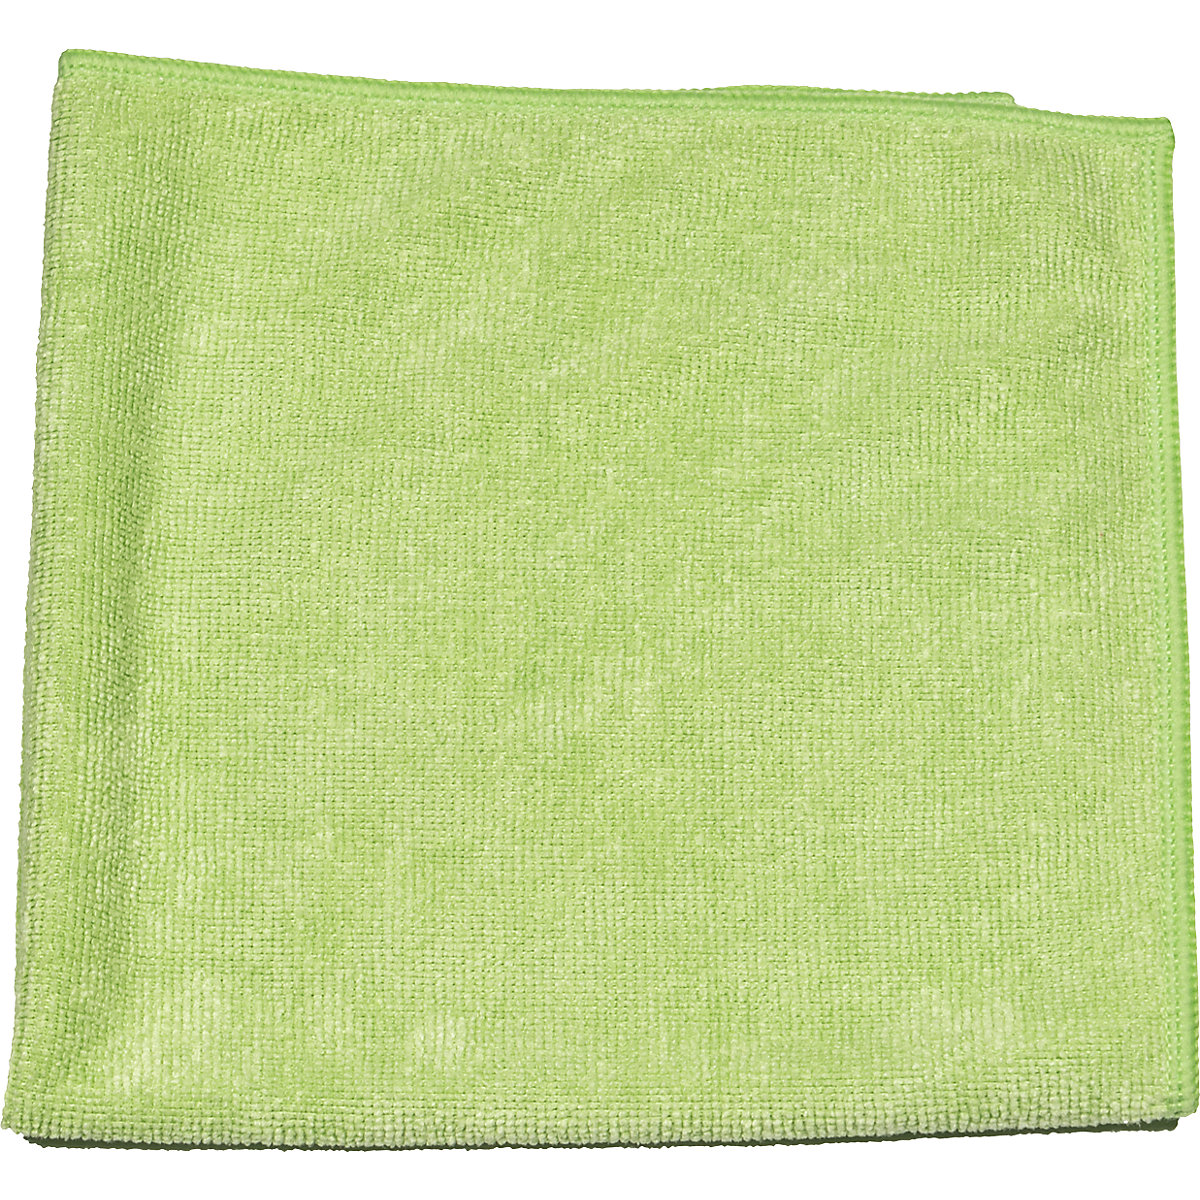 Rainbow Pro microfibre cloth, pack of 5, green-2